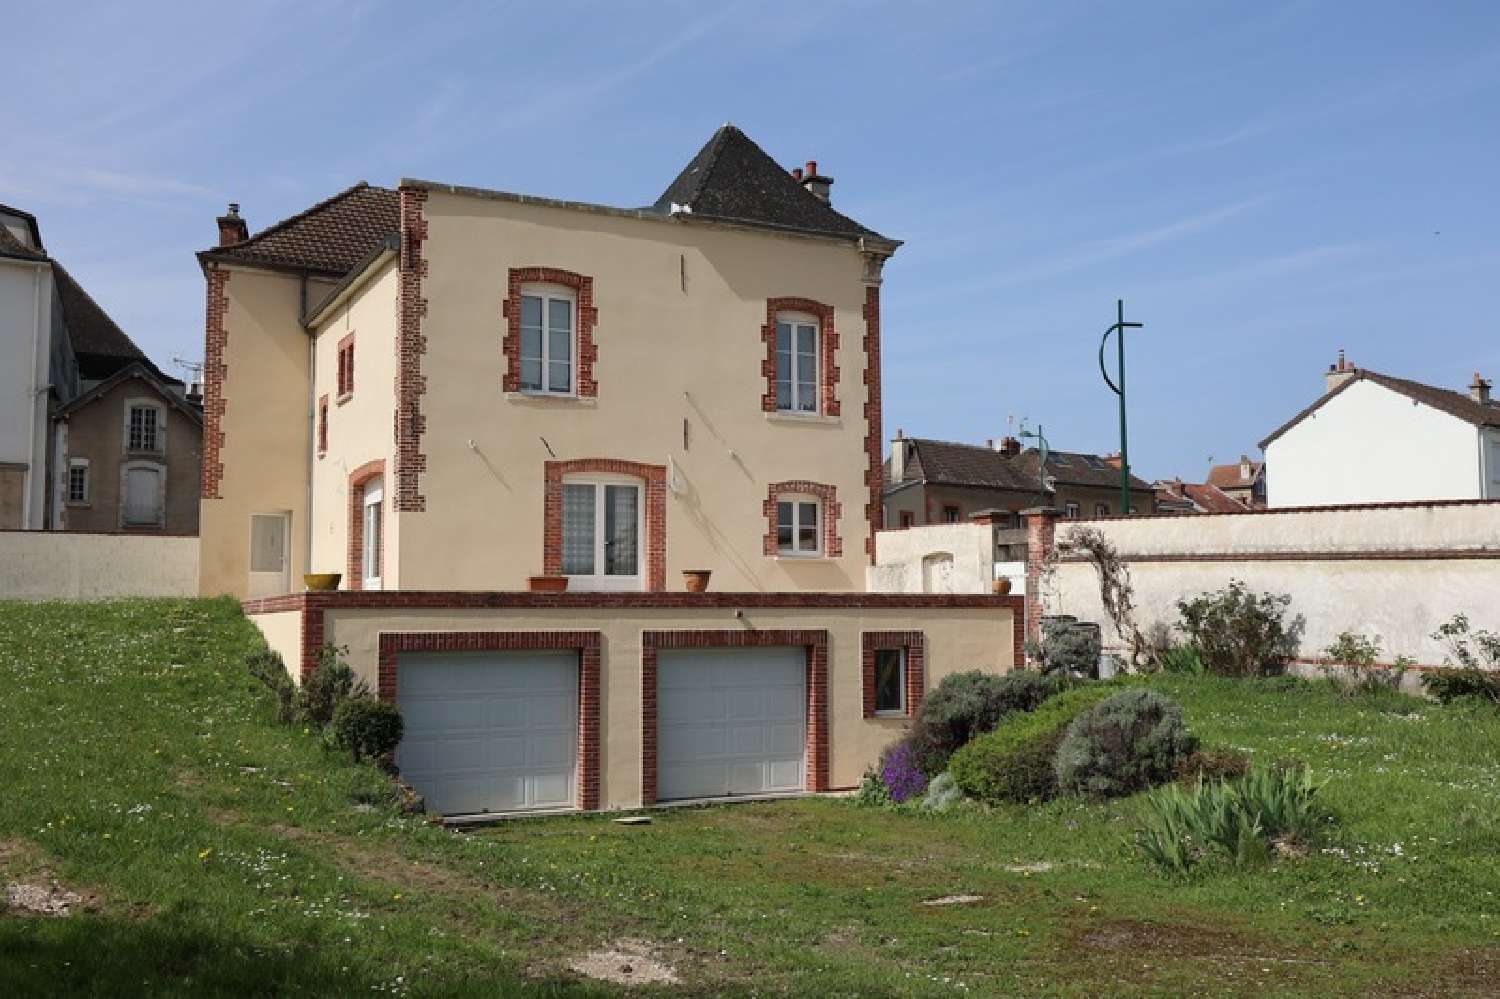  for sale village house Pierry Marne 1